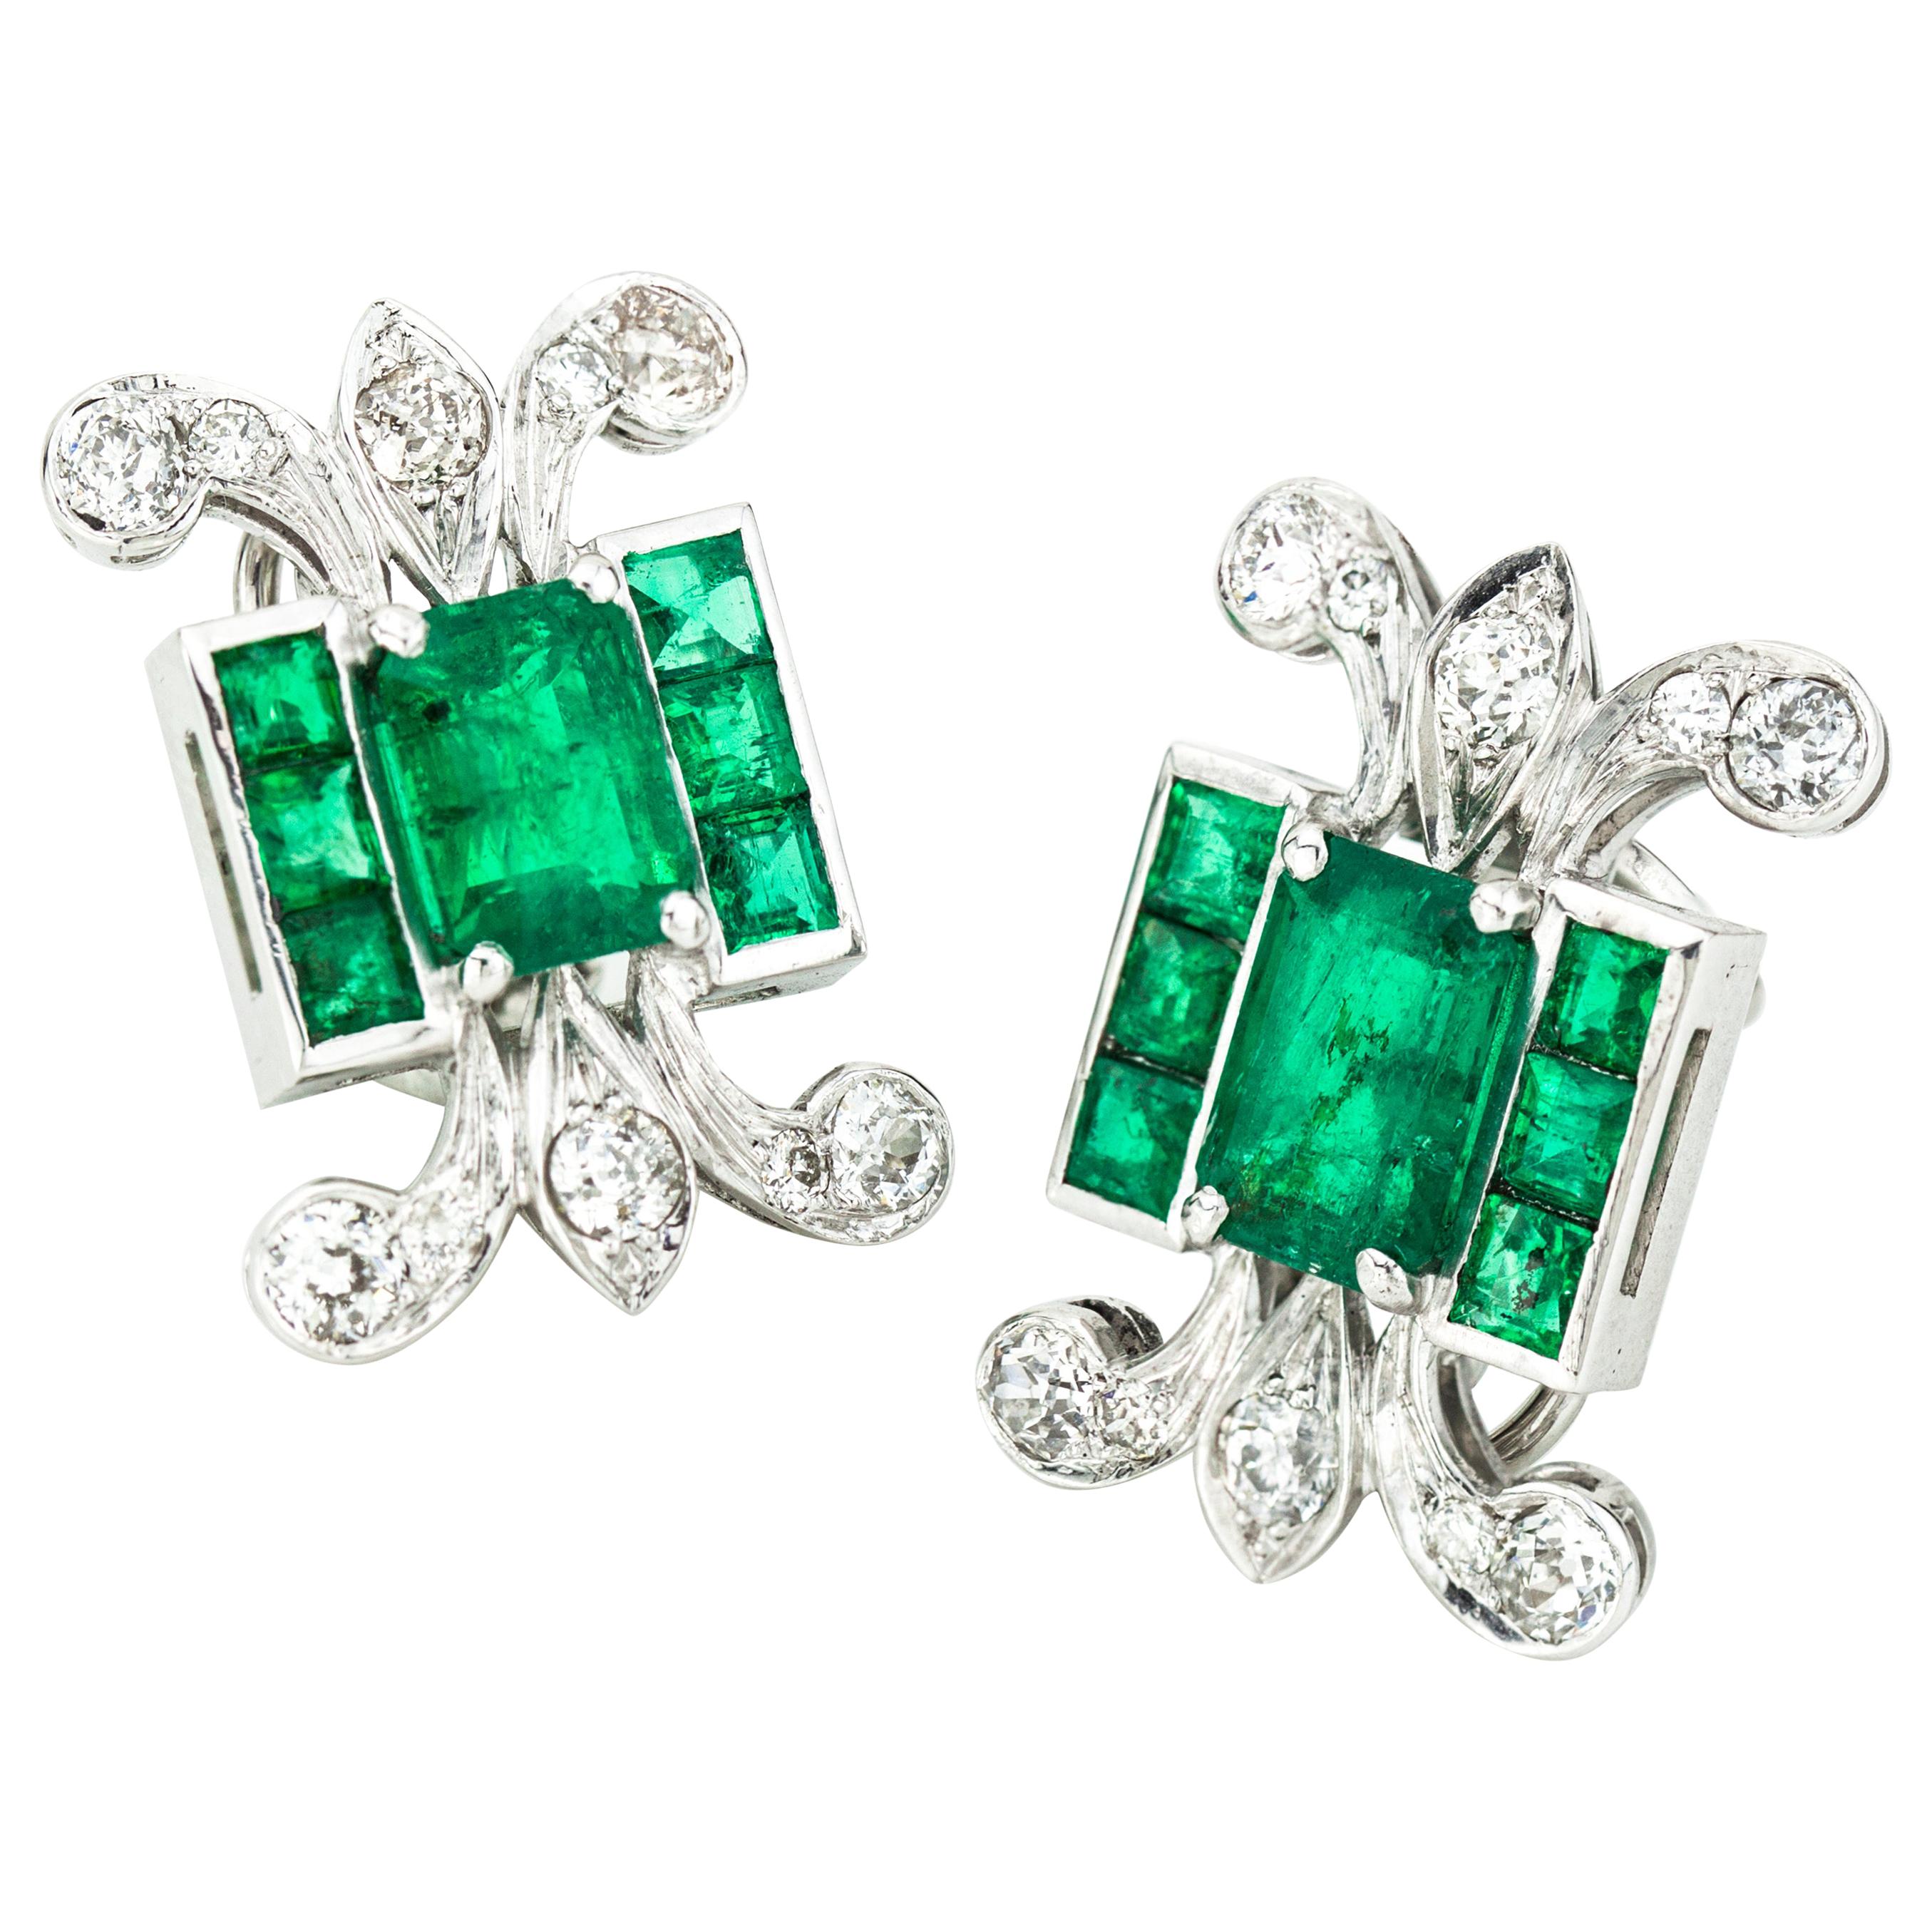 Platinum Ladies Clip-On Earrings with Natural Colombian Emeralds